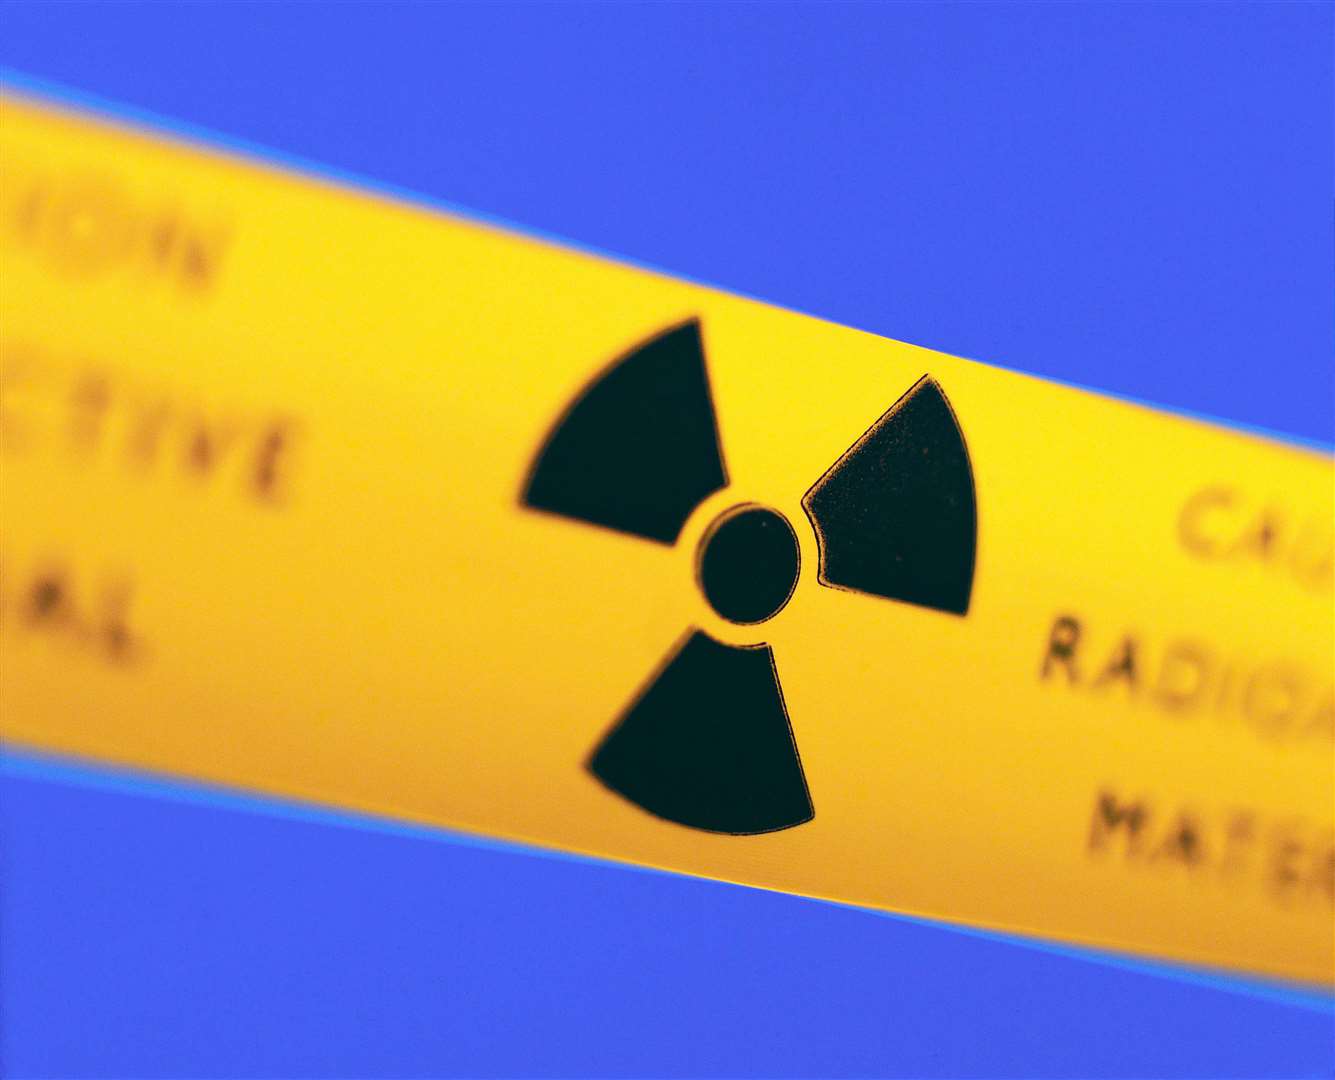 Romney Marsh could be the site for a nuclear waste site